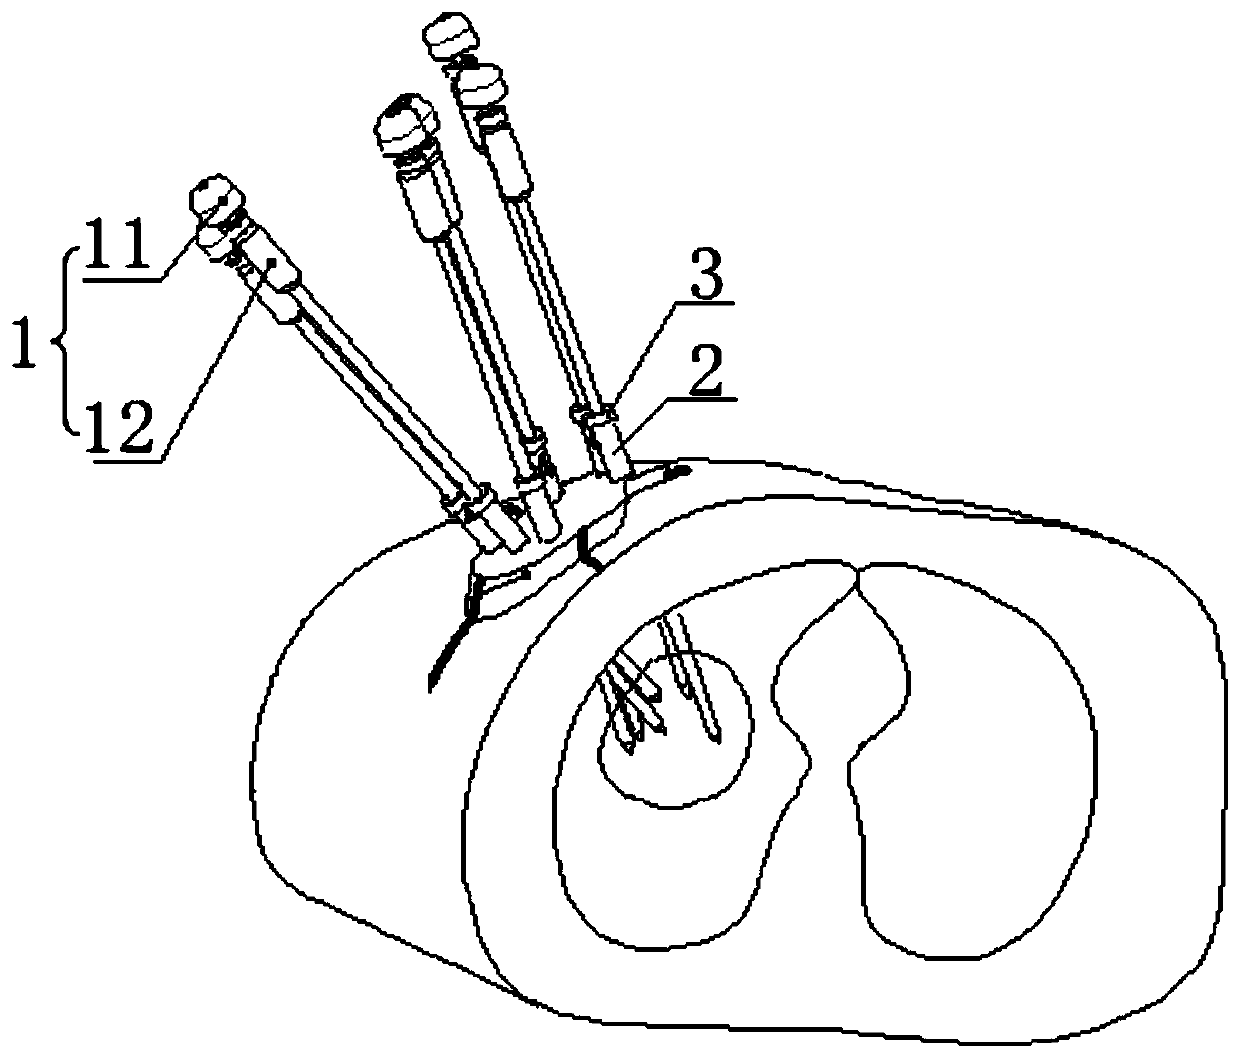 Image-lead after-loading interposition arthroplasty treatment system